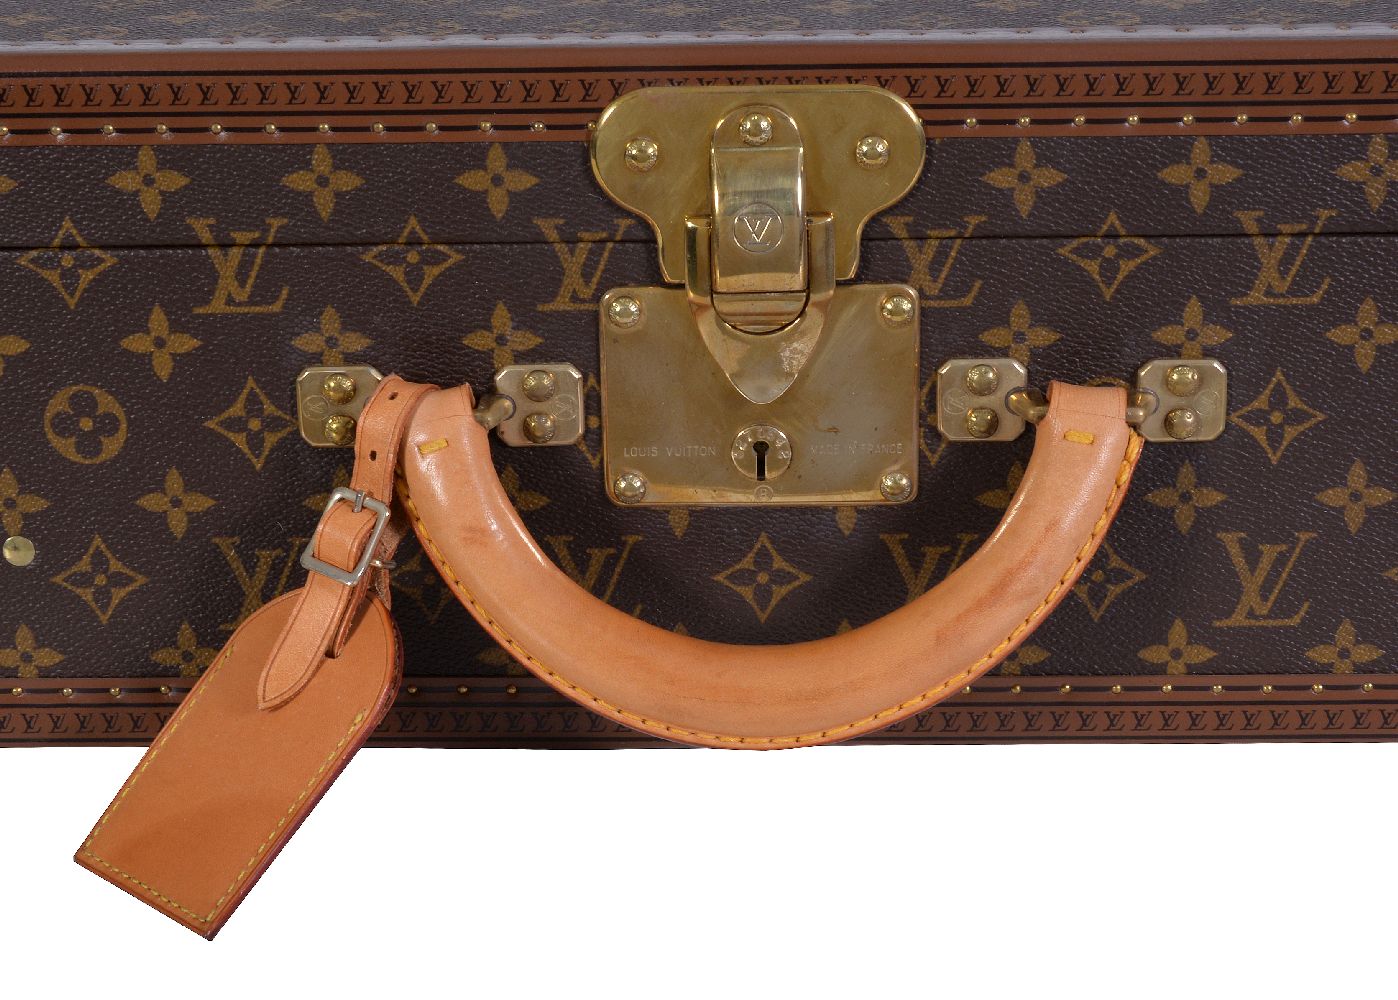 Louis Vuitton, Monogram, Bisten 70, a coated canvas and leather hard suitcase - Image 5 of 7